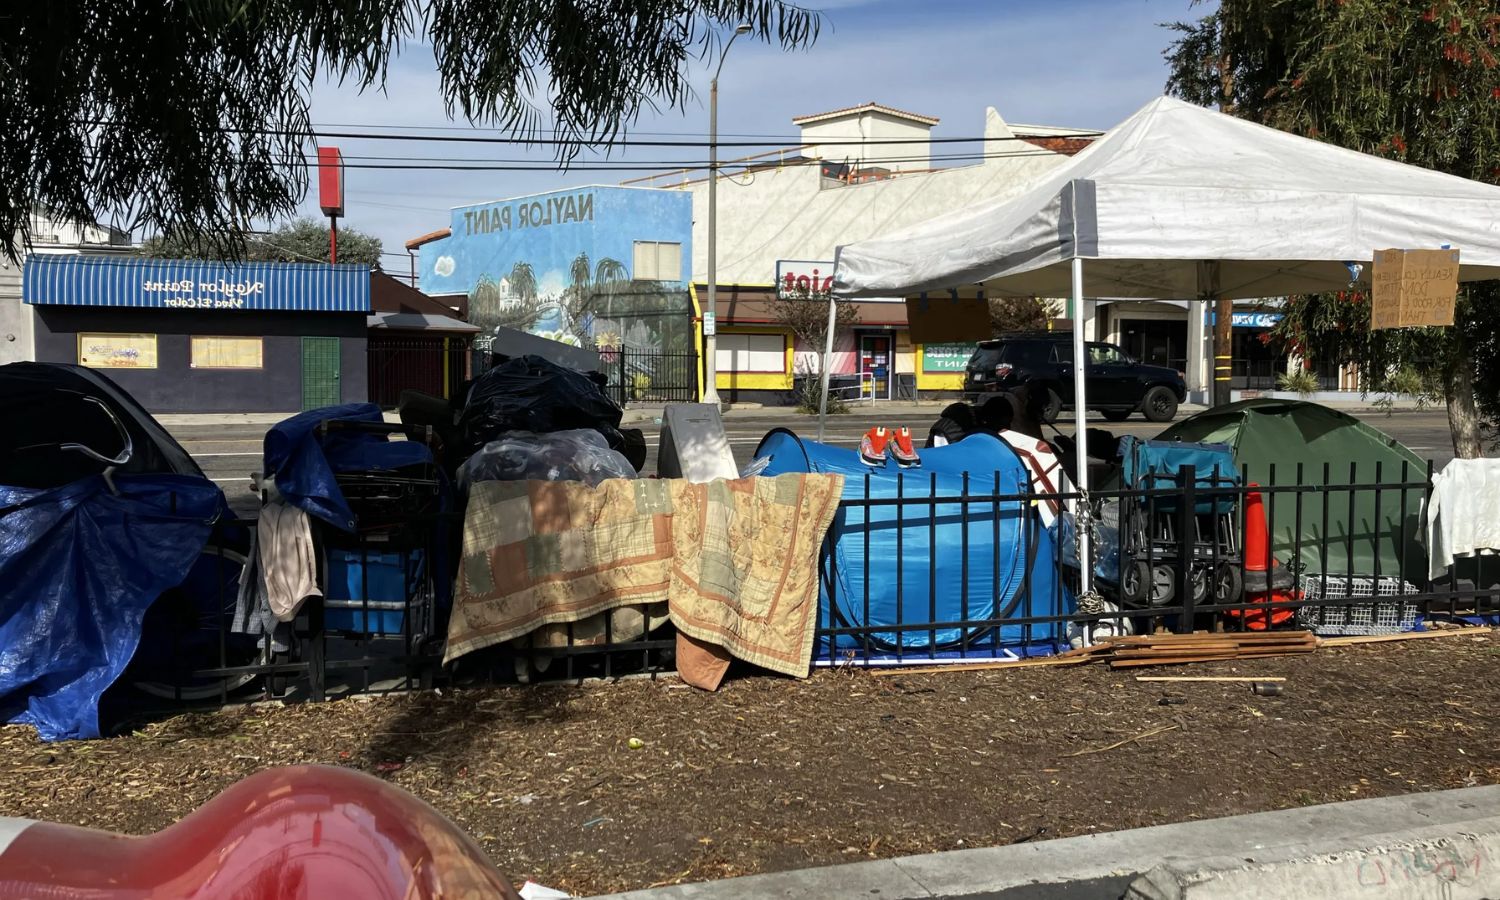 California Struggle for Clearing Homeless